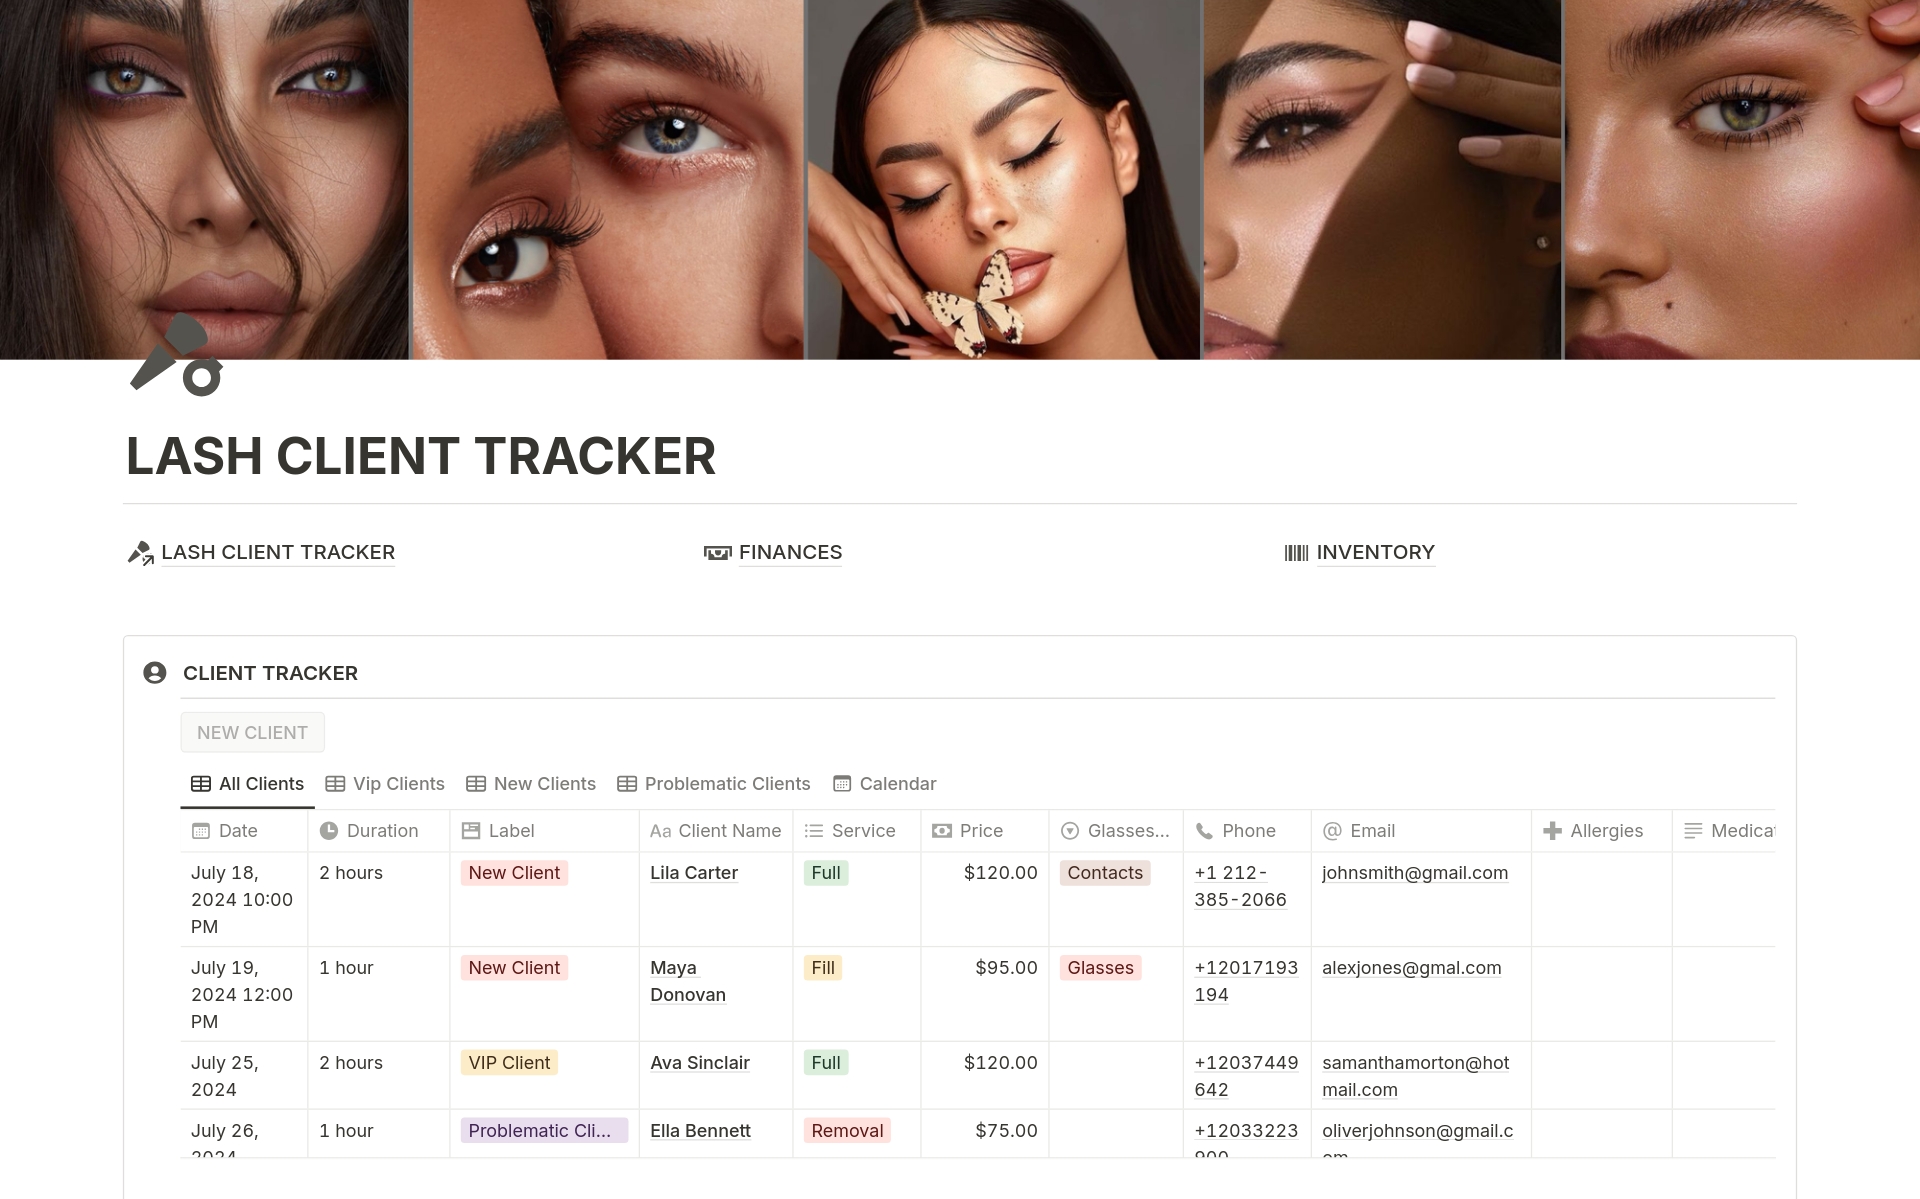 MAIN FEATURES

🖤 Client Tracker

🖤 Finances

🖤 Inventory